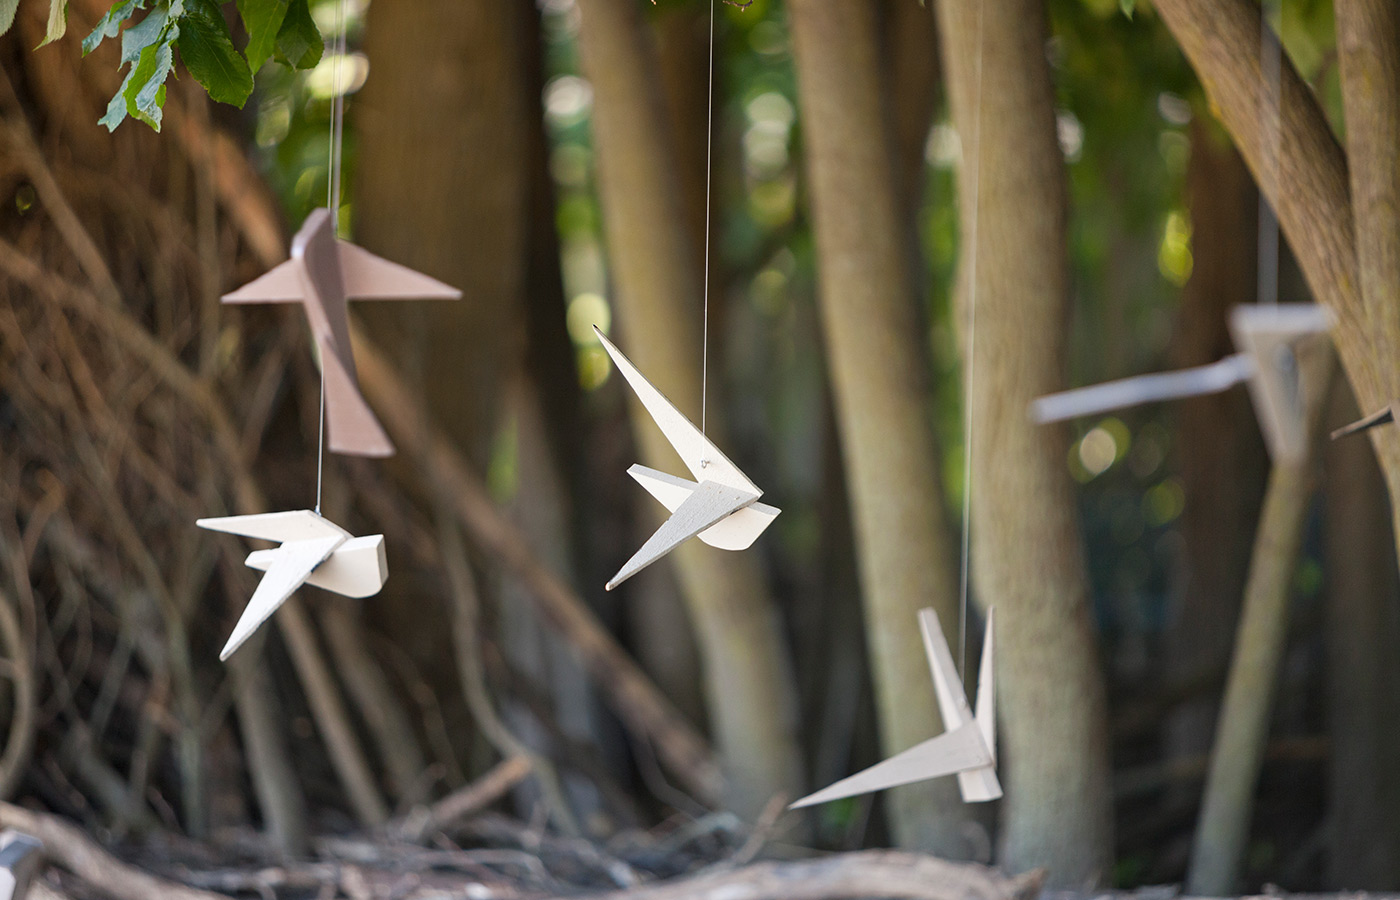 Wooden birds are hanging in a garden.